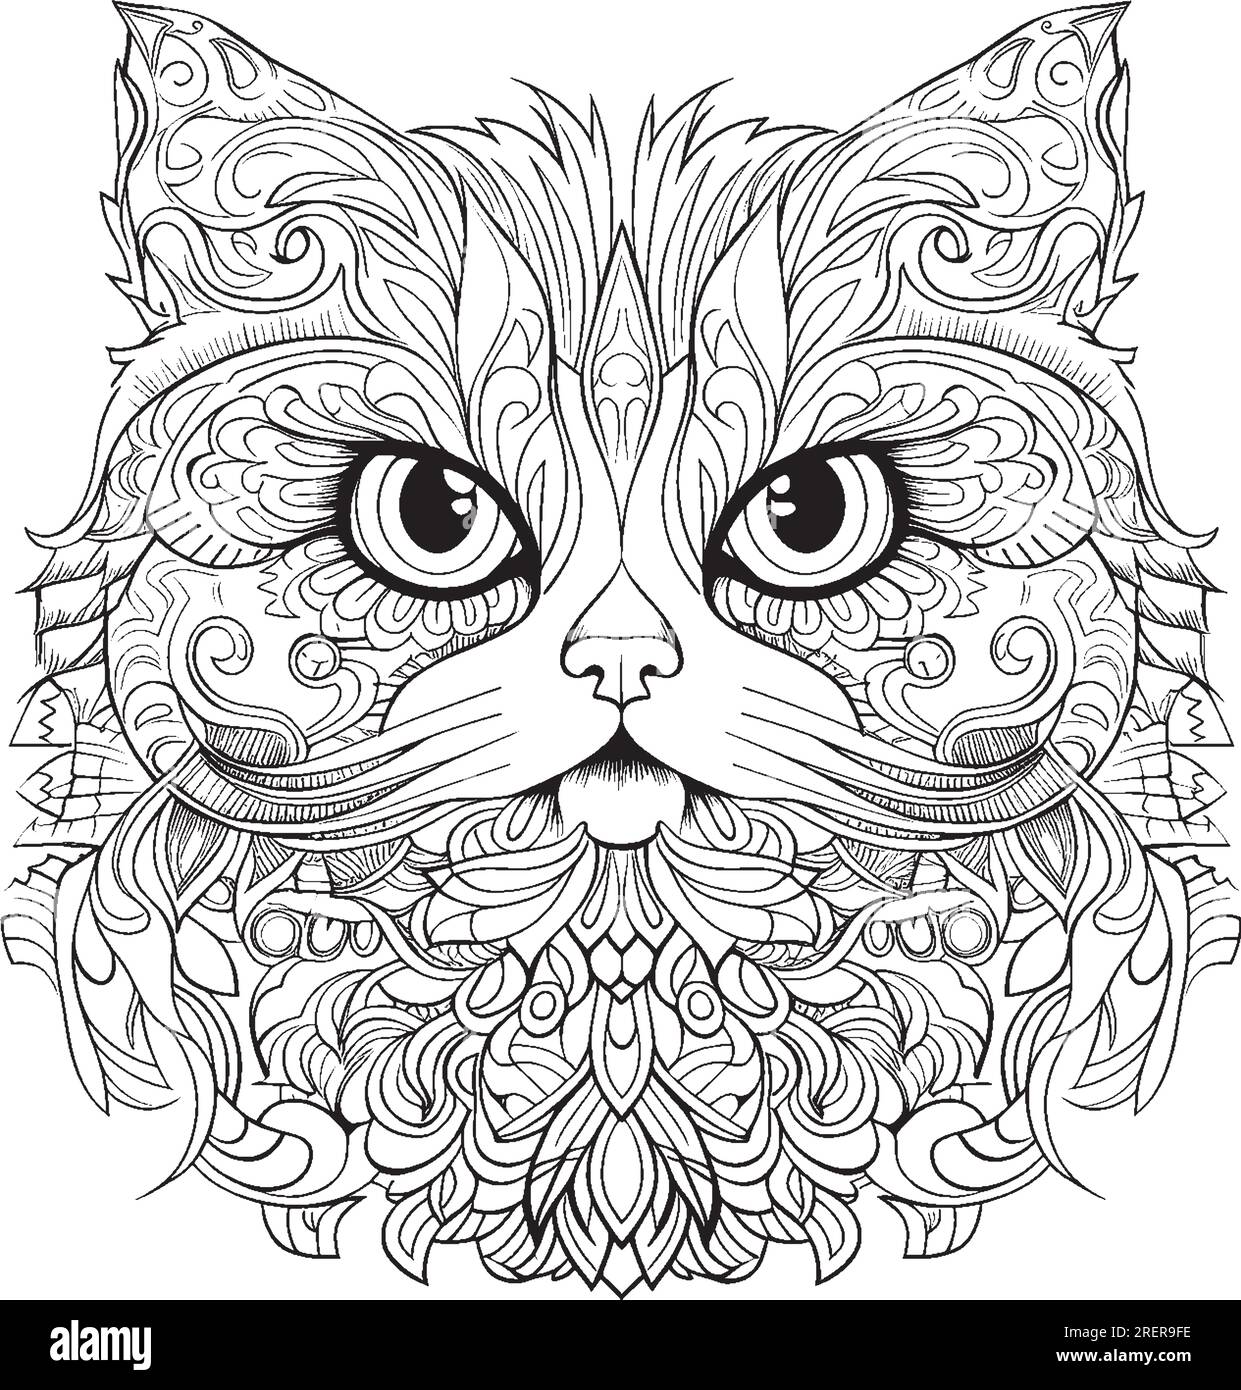 Mandala coloring pages for kids and adults stock vector image art